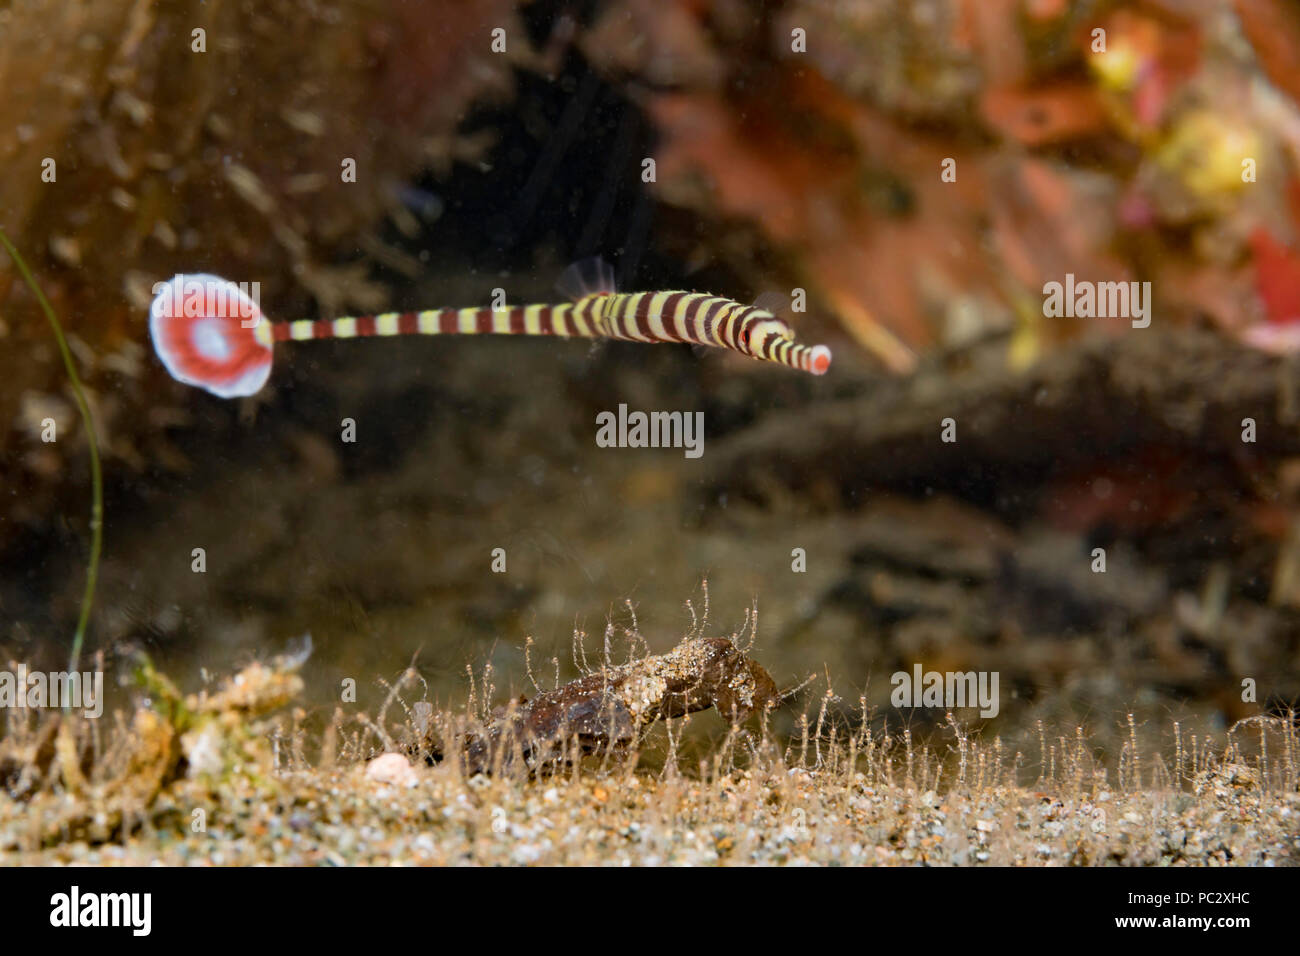 This female banded pipefish, Dunckerocampus dactyliophorus, is pictured above a sandy bottom covered with skeleton shrimp, Caprellide sp. Countless nu Stock Photo